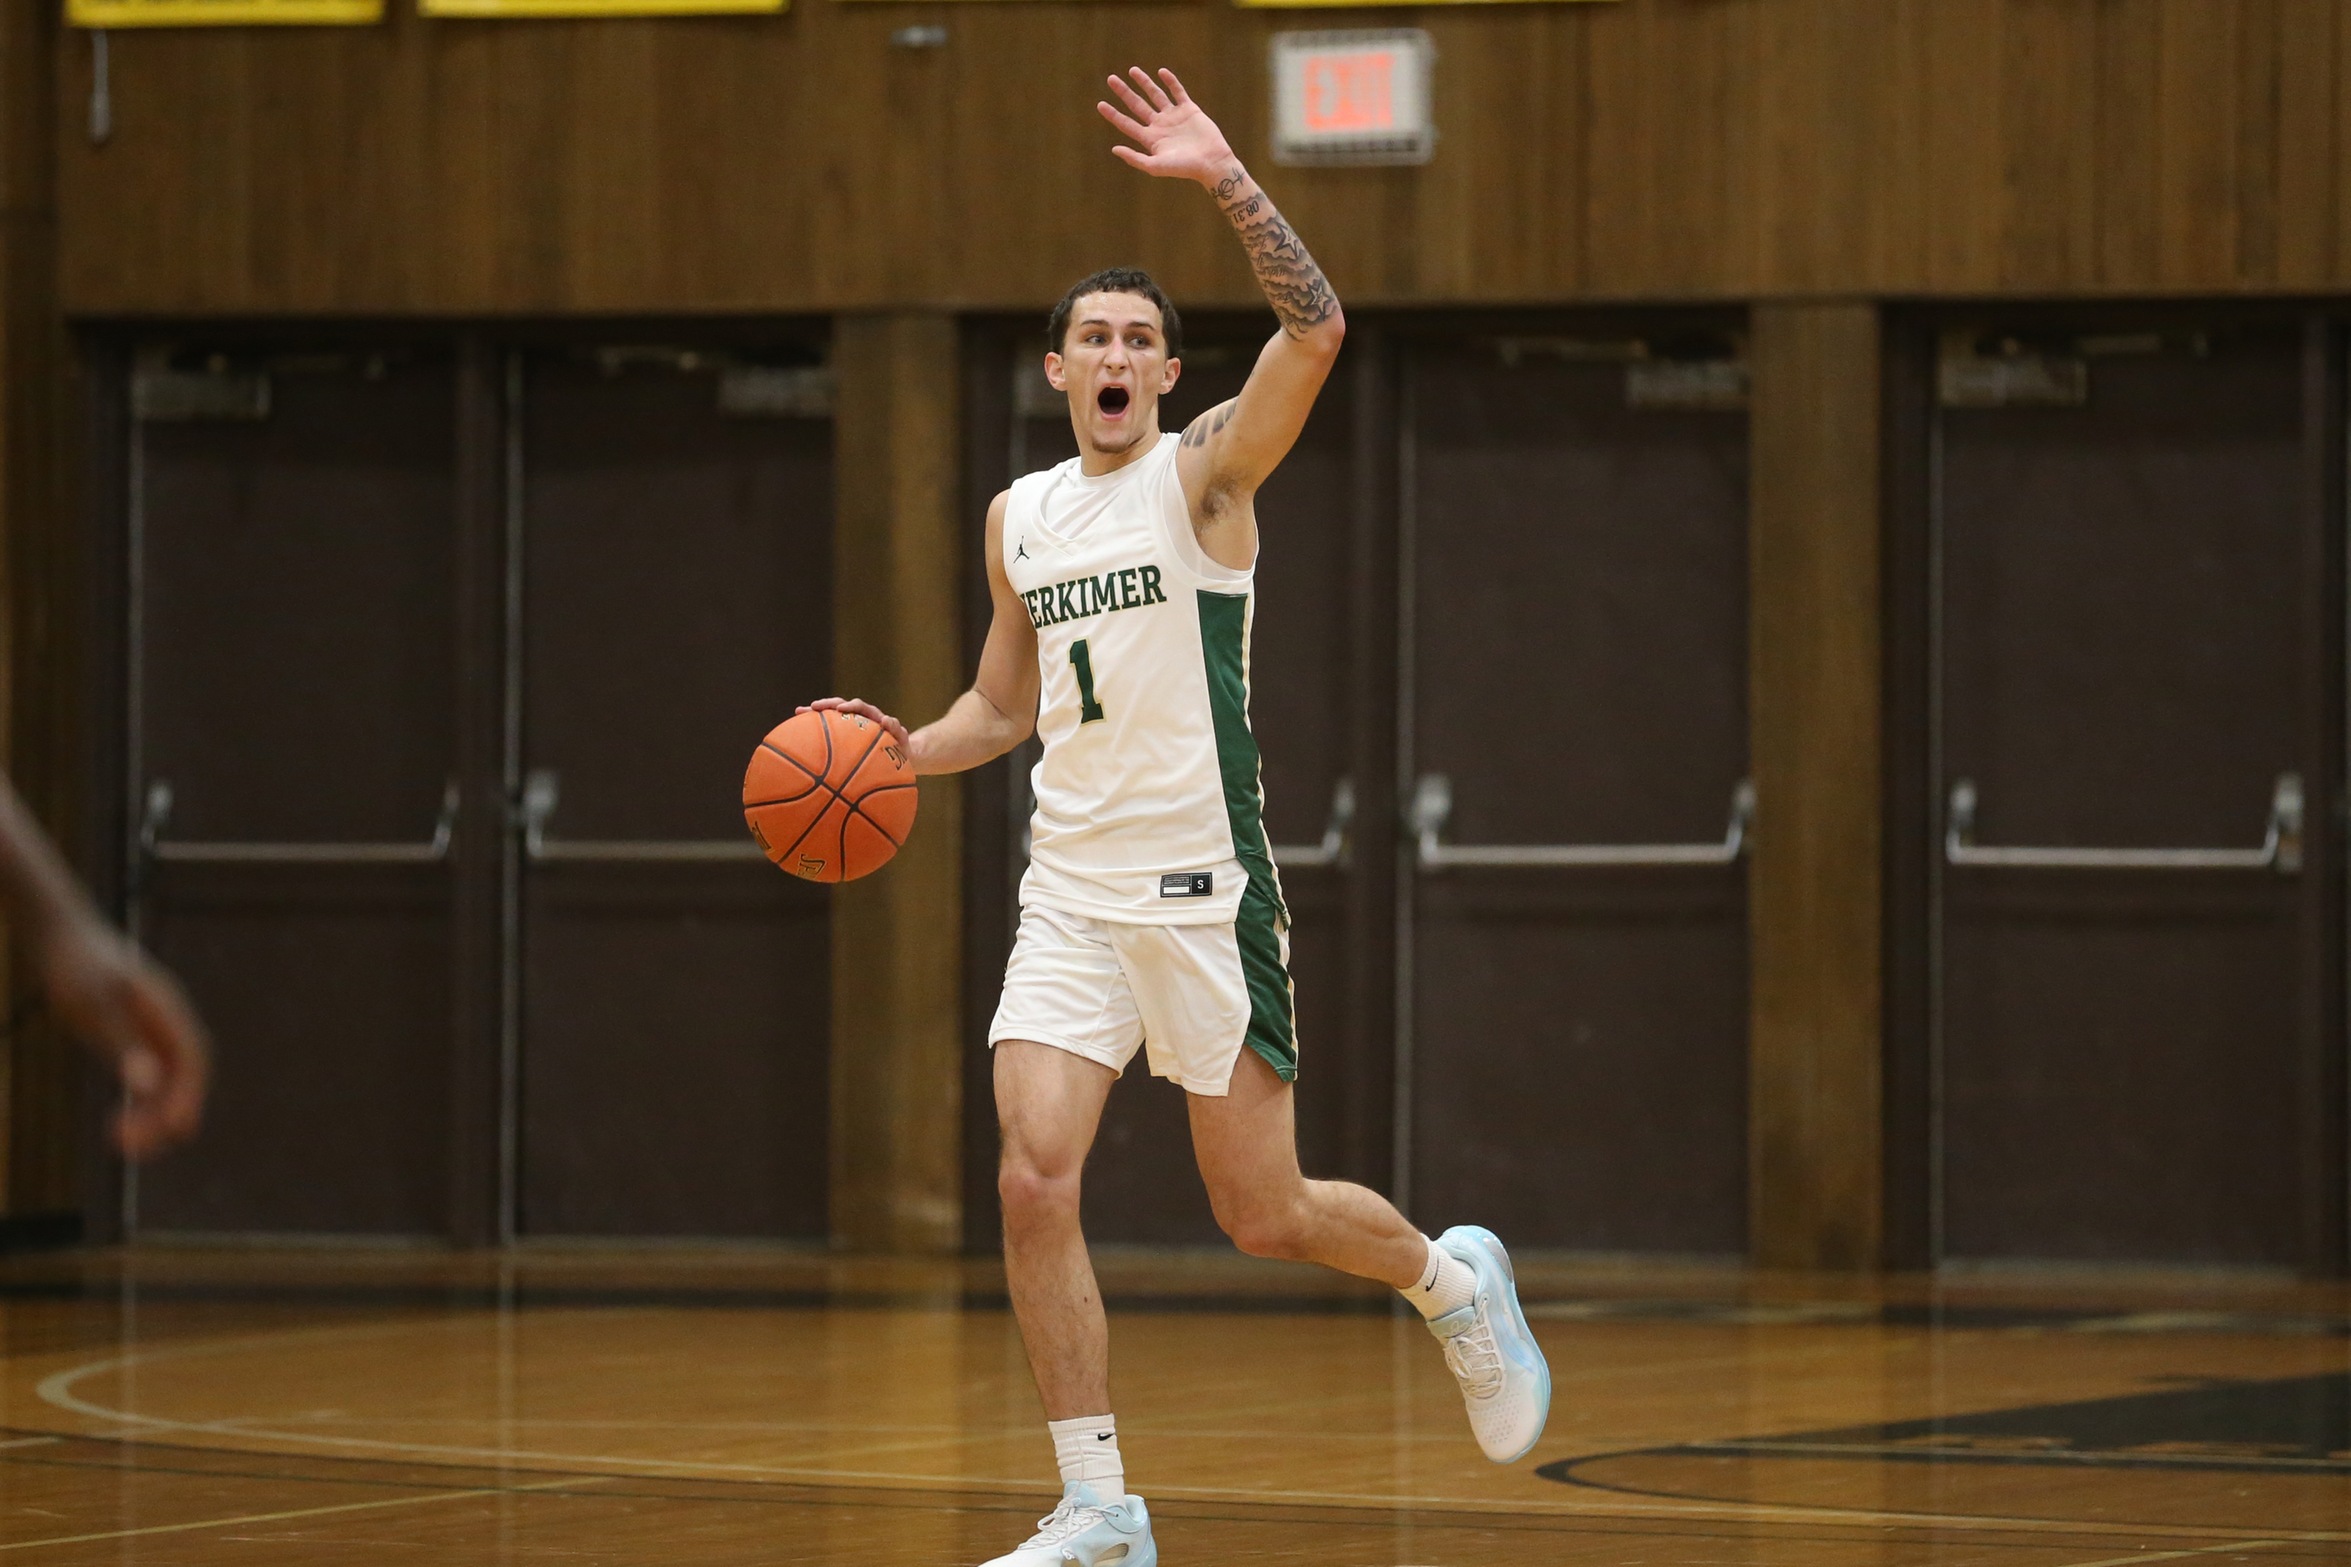 No. 9 Herkimer Men's Basketball Improve to 6-1 with Win over No. 12 Mohawk Valley